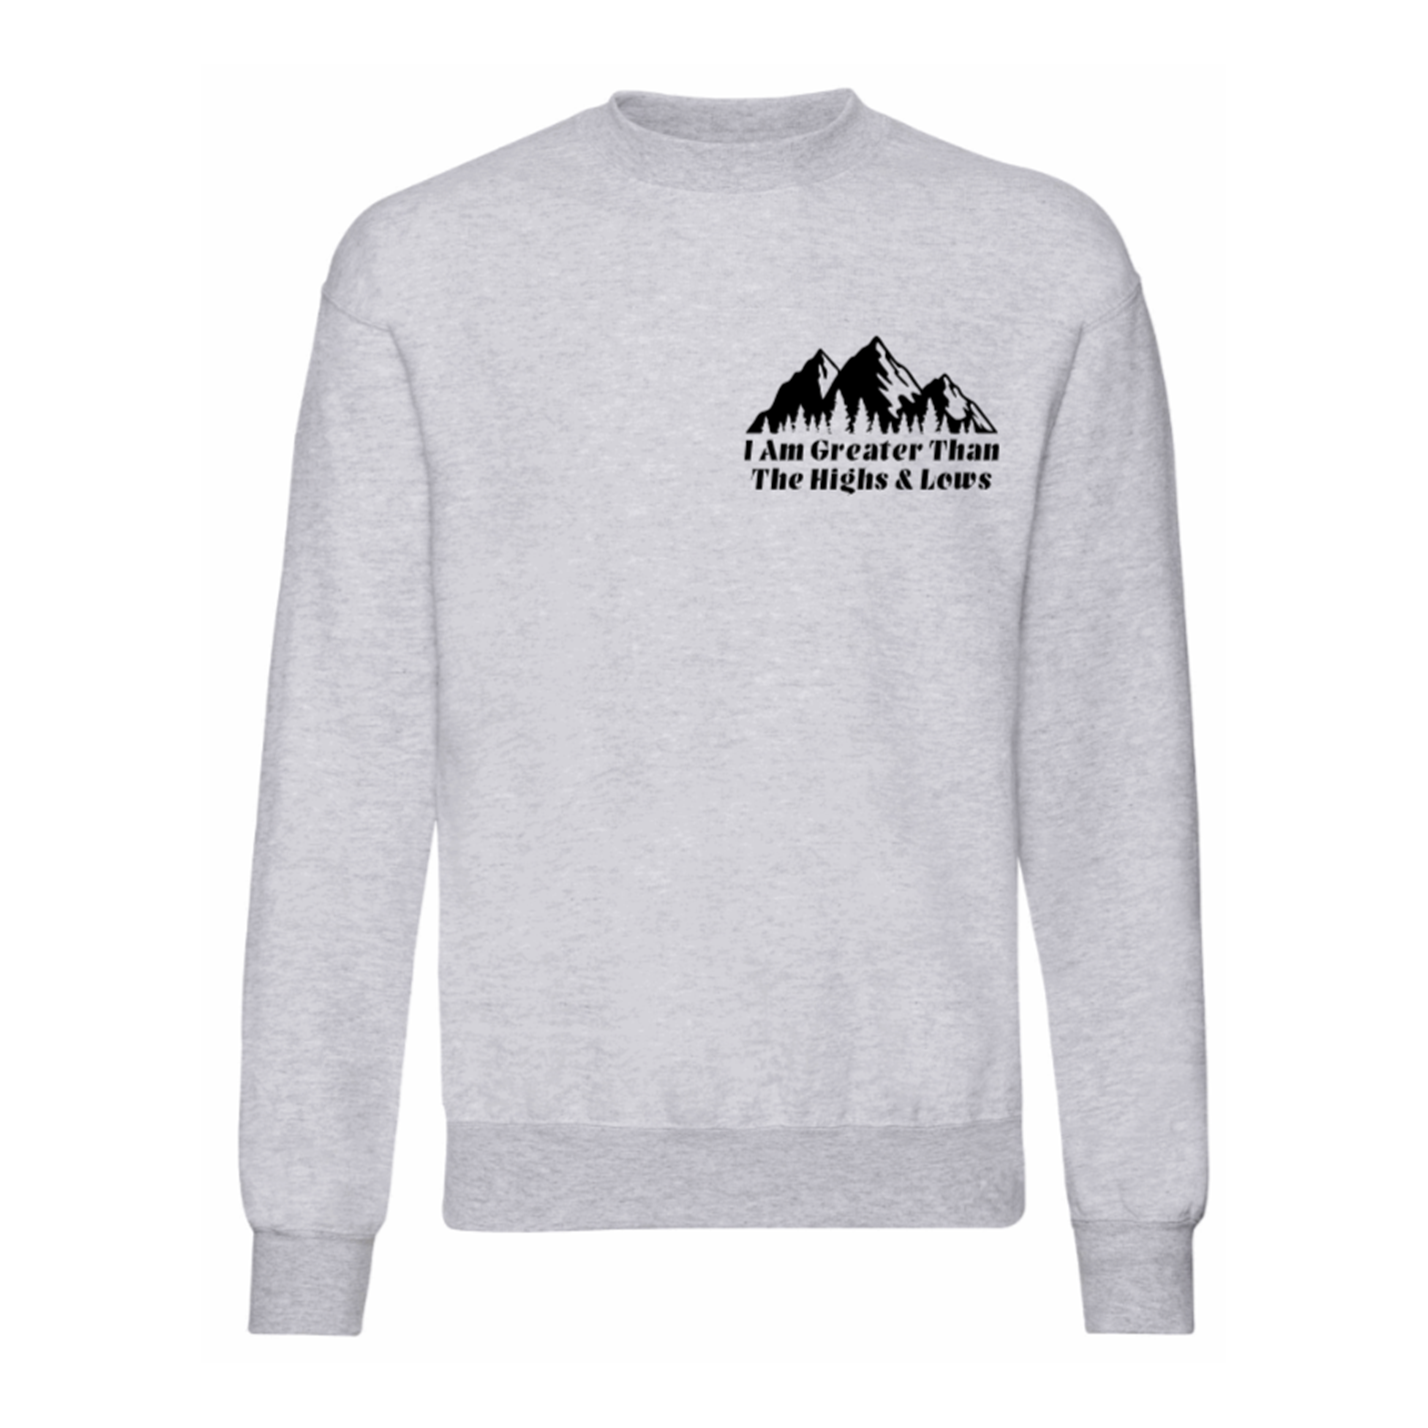 I Am Greater Than The Highs & Lows Sweatshirt